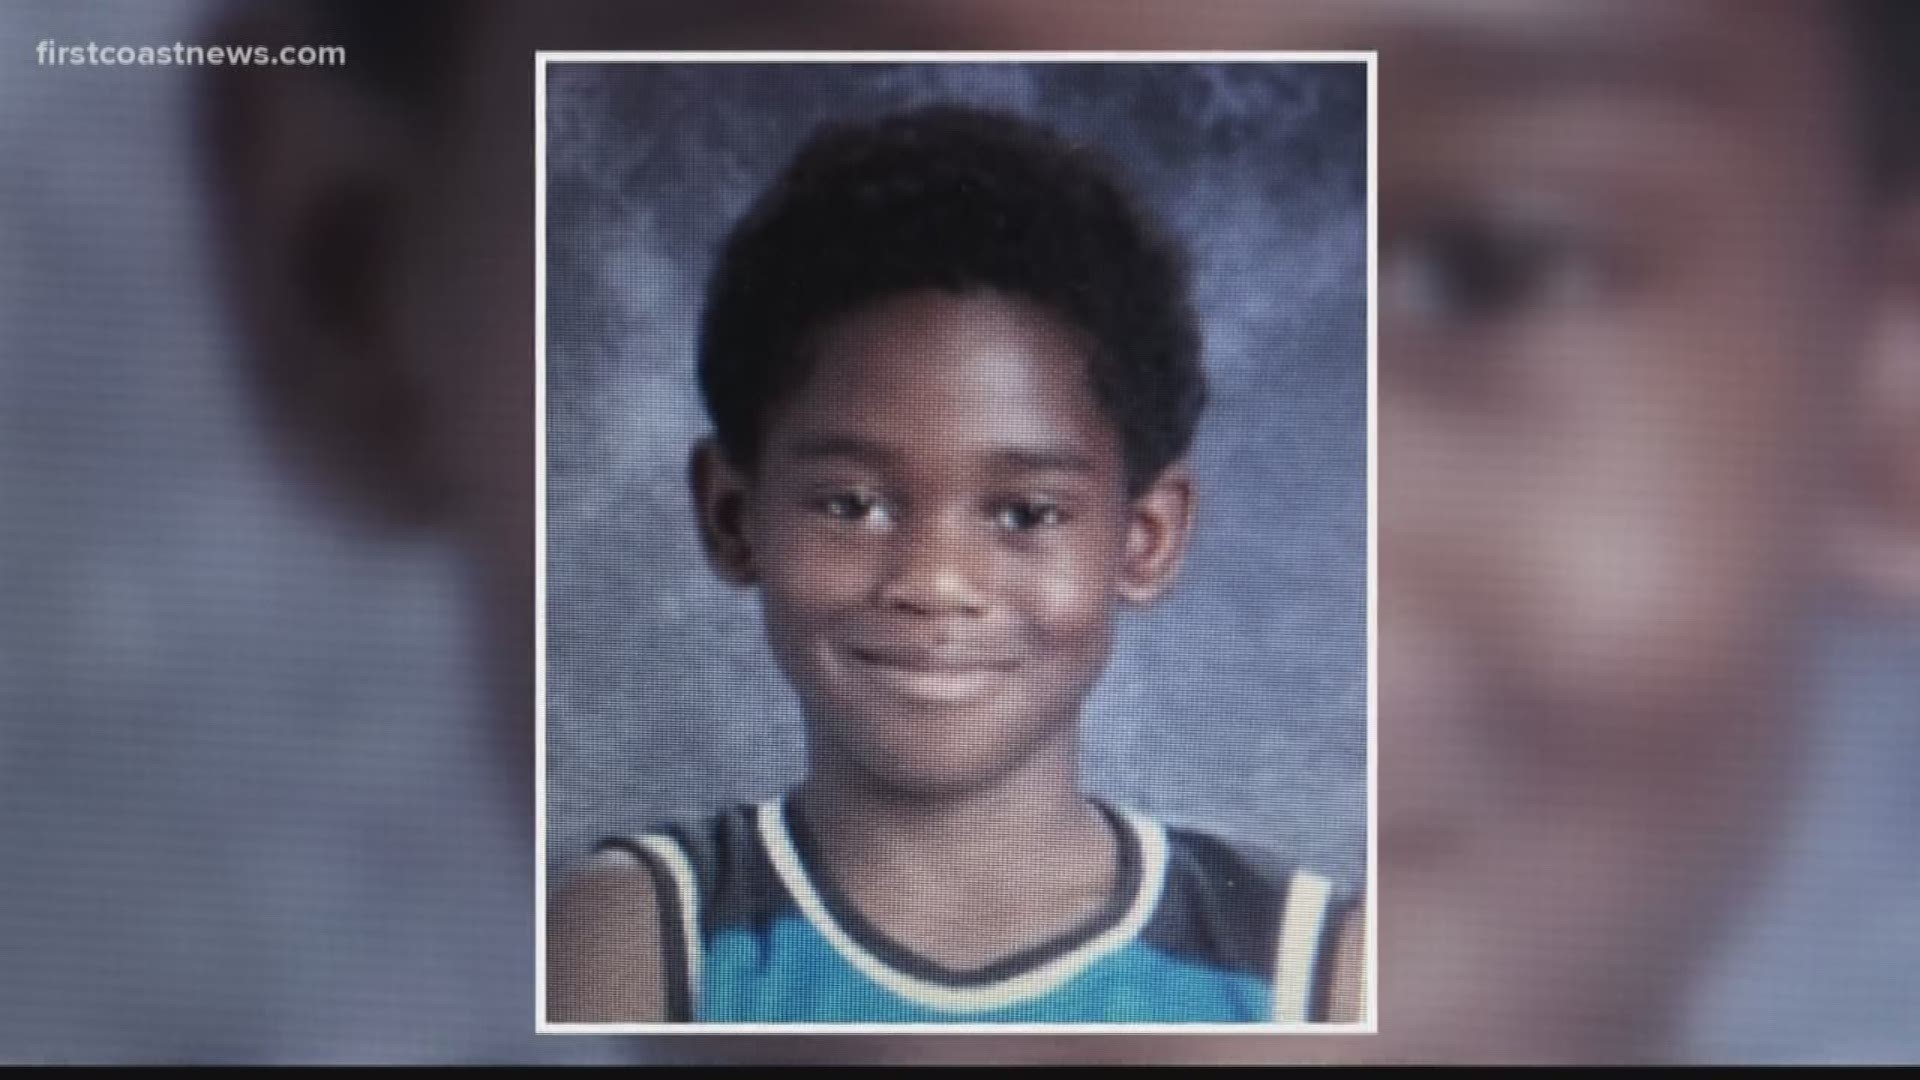 UPDATE: The Clay County Sheriff's Office tweeted at 9:07 p.m. that 10-year-old Cedric Barnes was found safe.